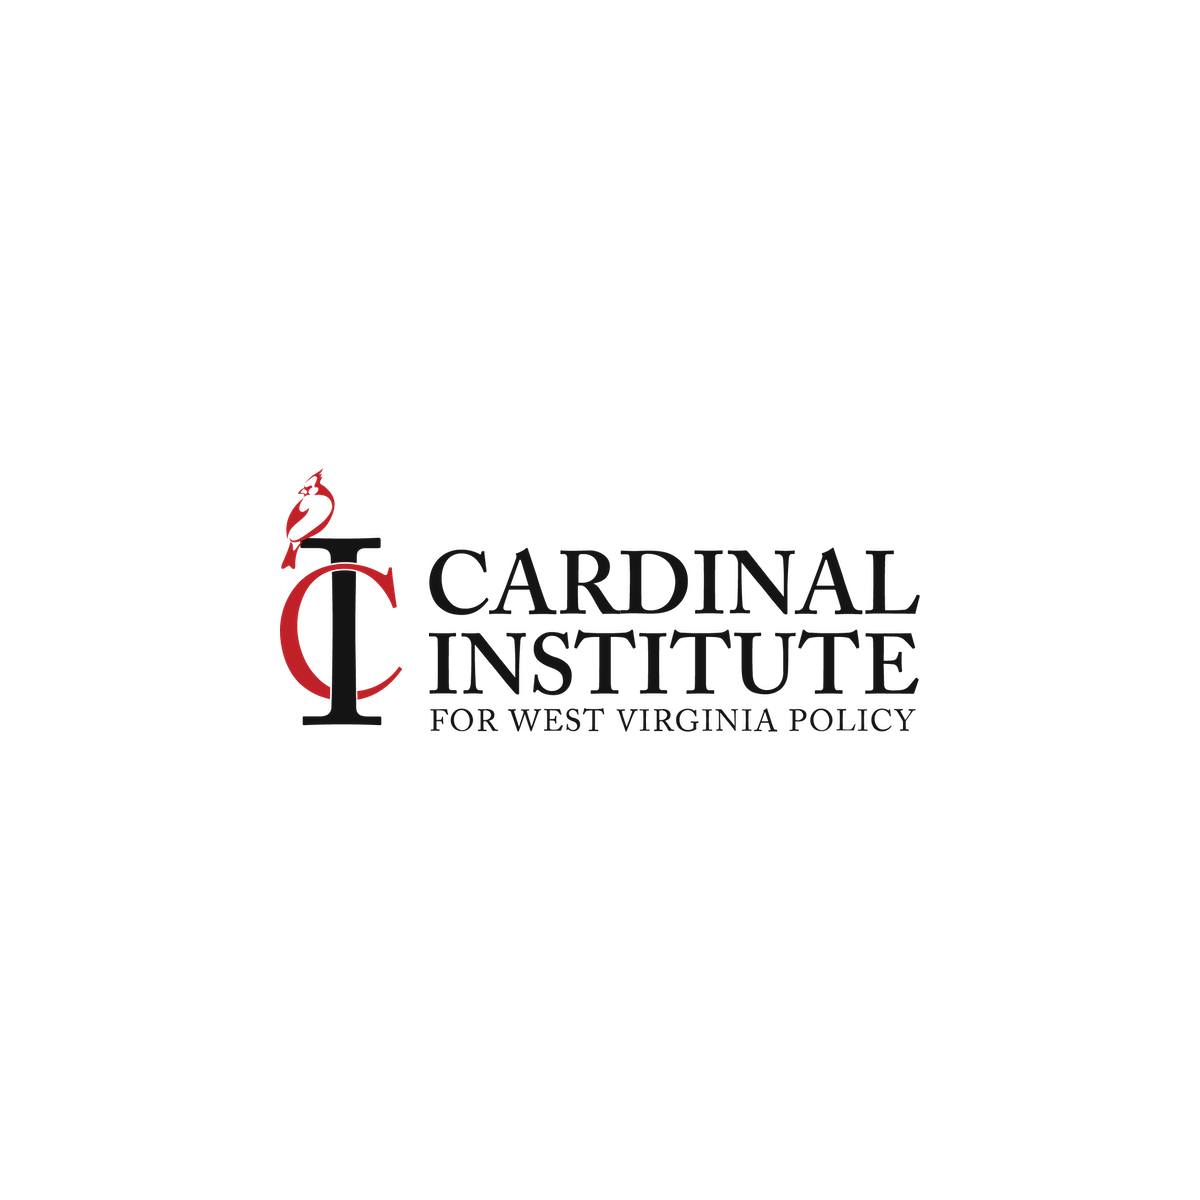 https://classicaleducationsymposium.org/wp-content/uploads/2022/03/Cardinal-Institute-Small.png